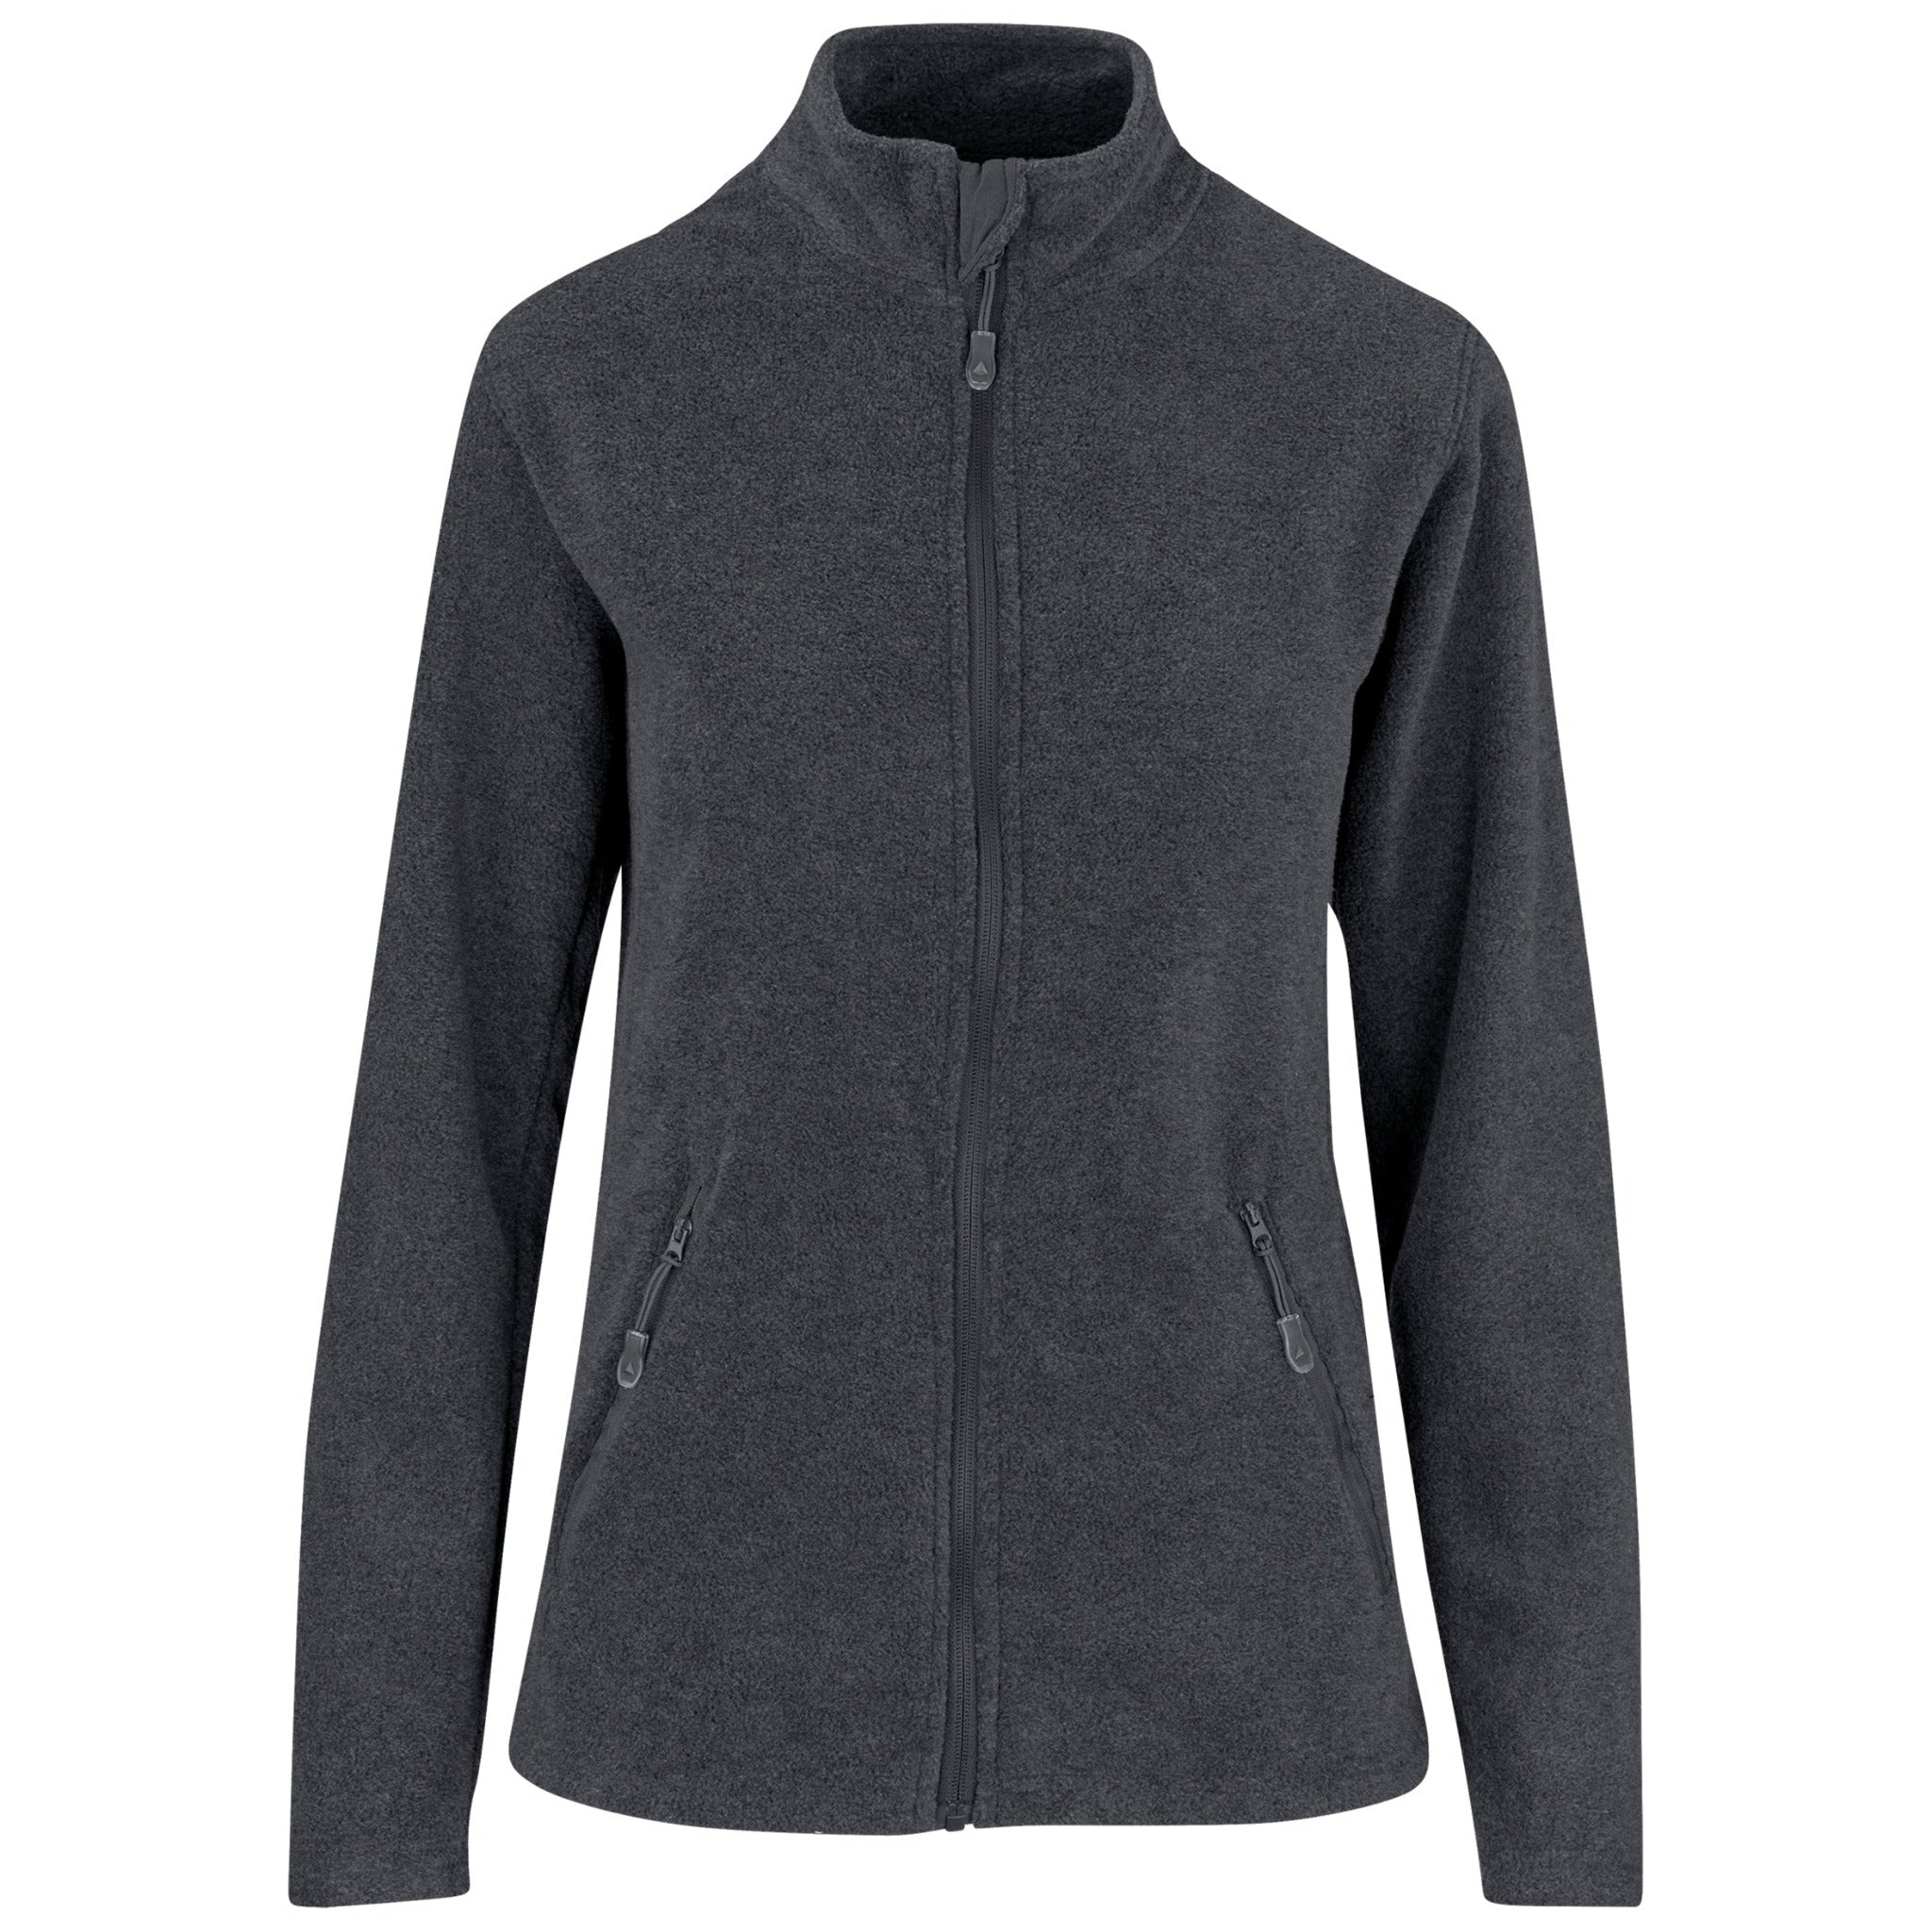 Front view of a ladies charcoal-coloured micro fleece jacket.